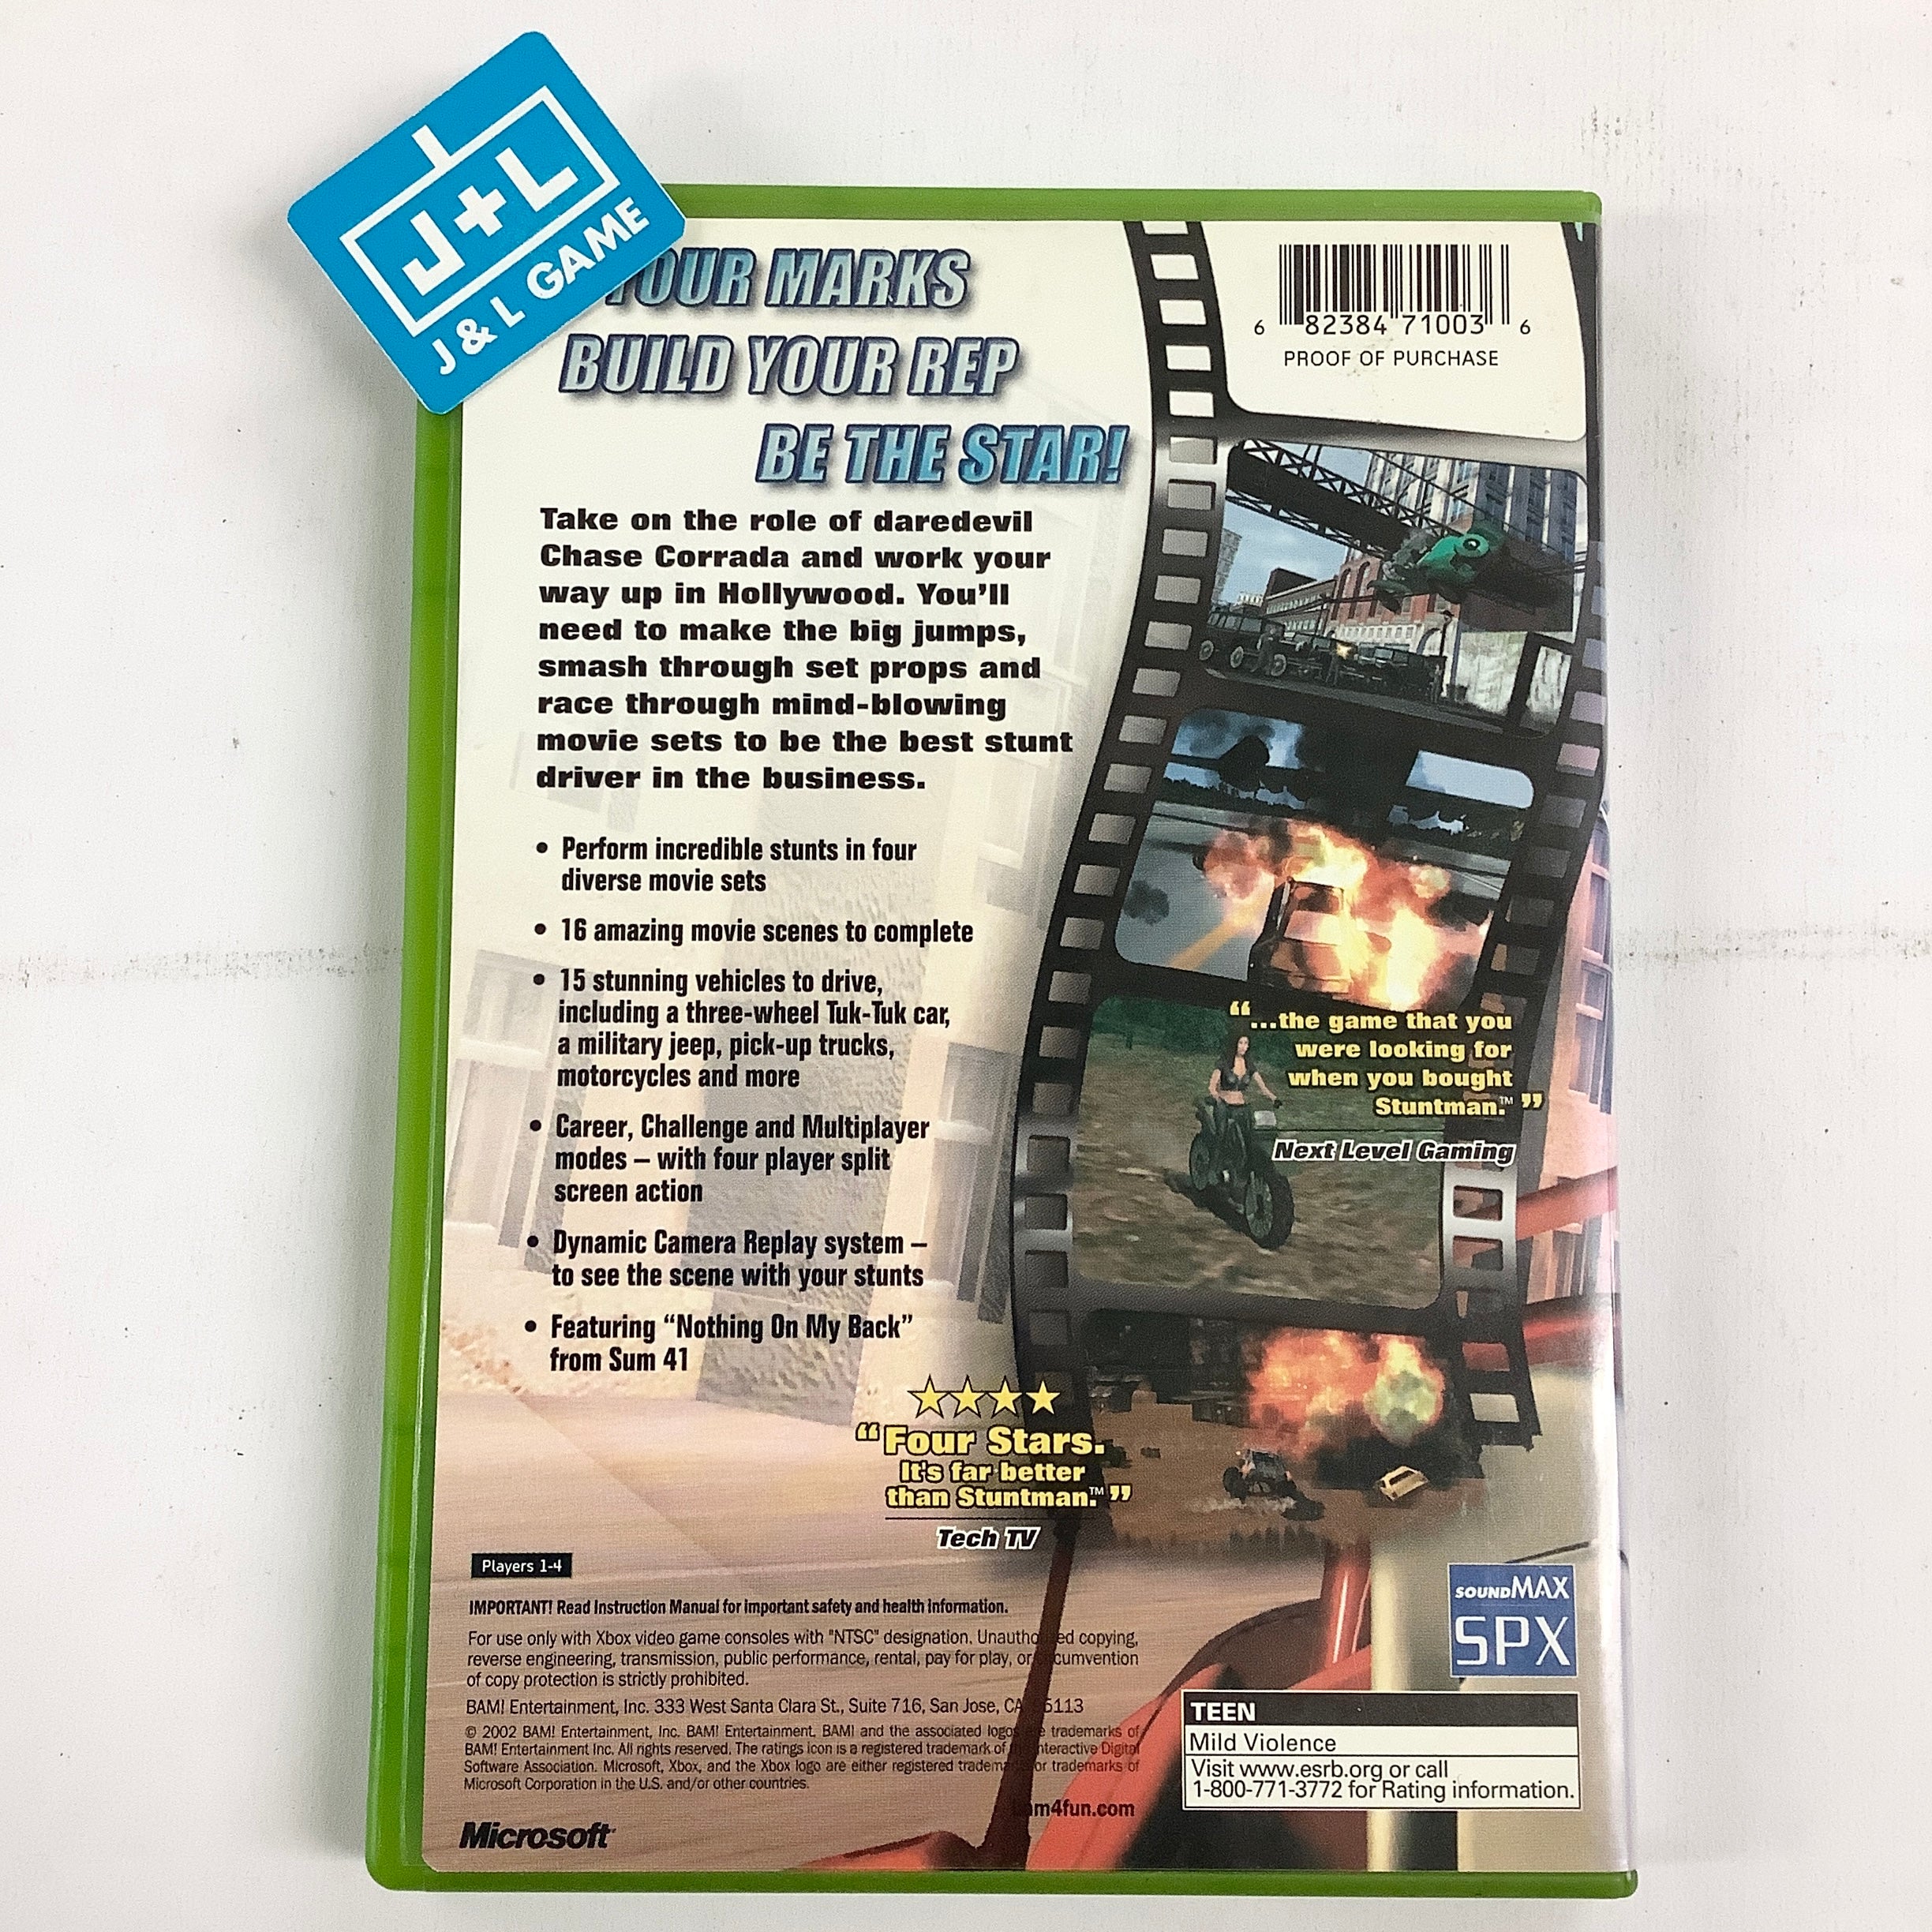 Chase: Hollywood Stunt Driver - (XB) Xbox [Pre-Owned] Video Games Bam Entertainment   